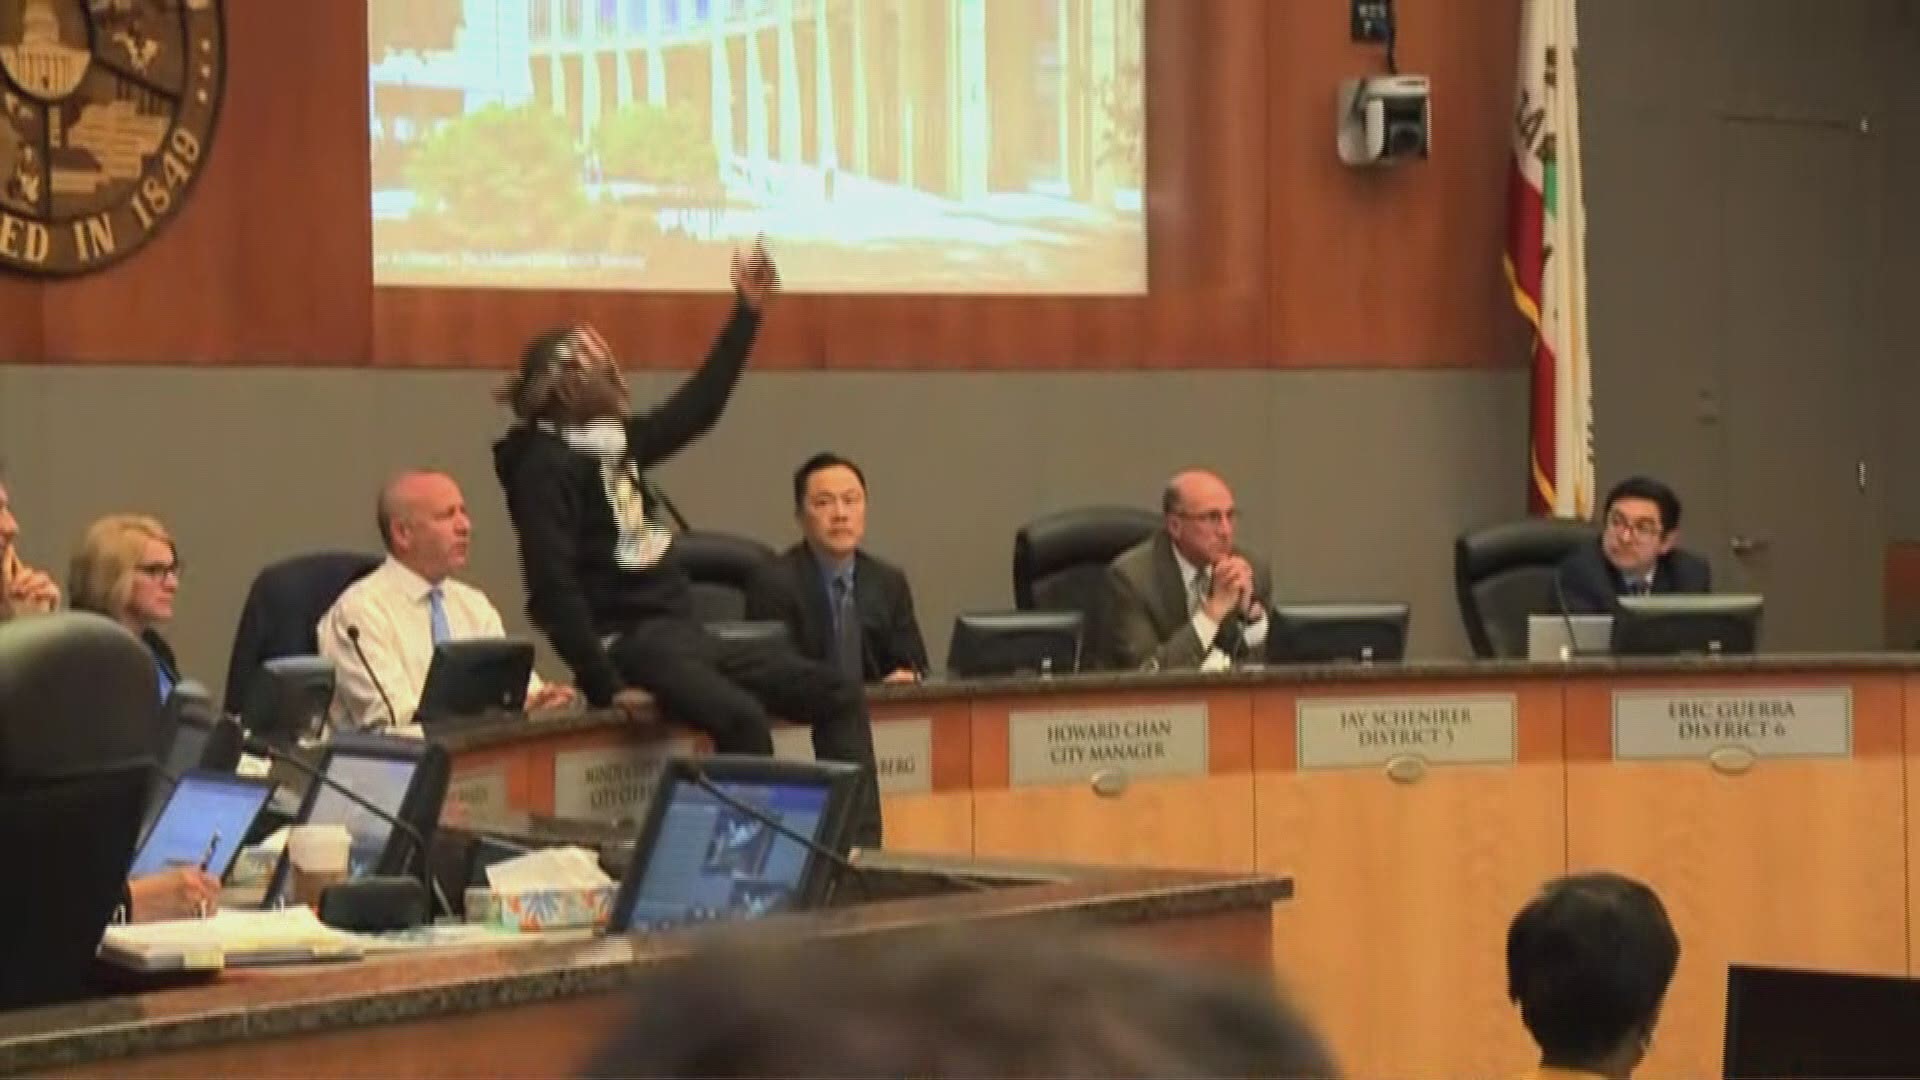 The Sacramento City Council meeting hit a recess for 15 minutes after Stephon Clark's brother, Stevante, took control of the heated discussion. Officers were then standing behind the City Council seats. (Mar. 27, 2018)